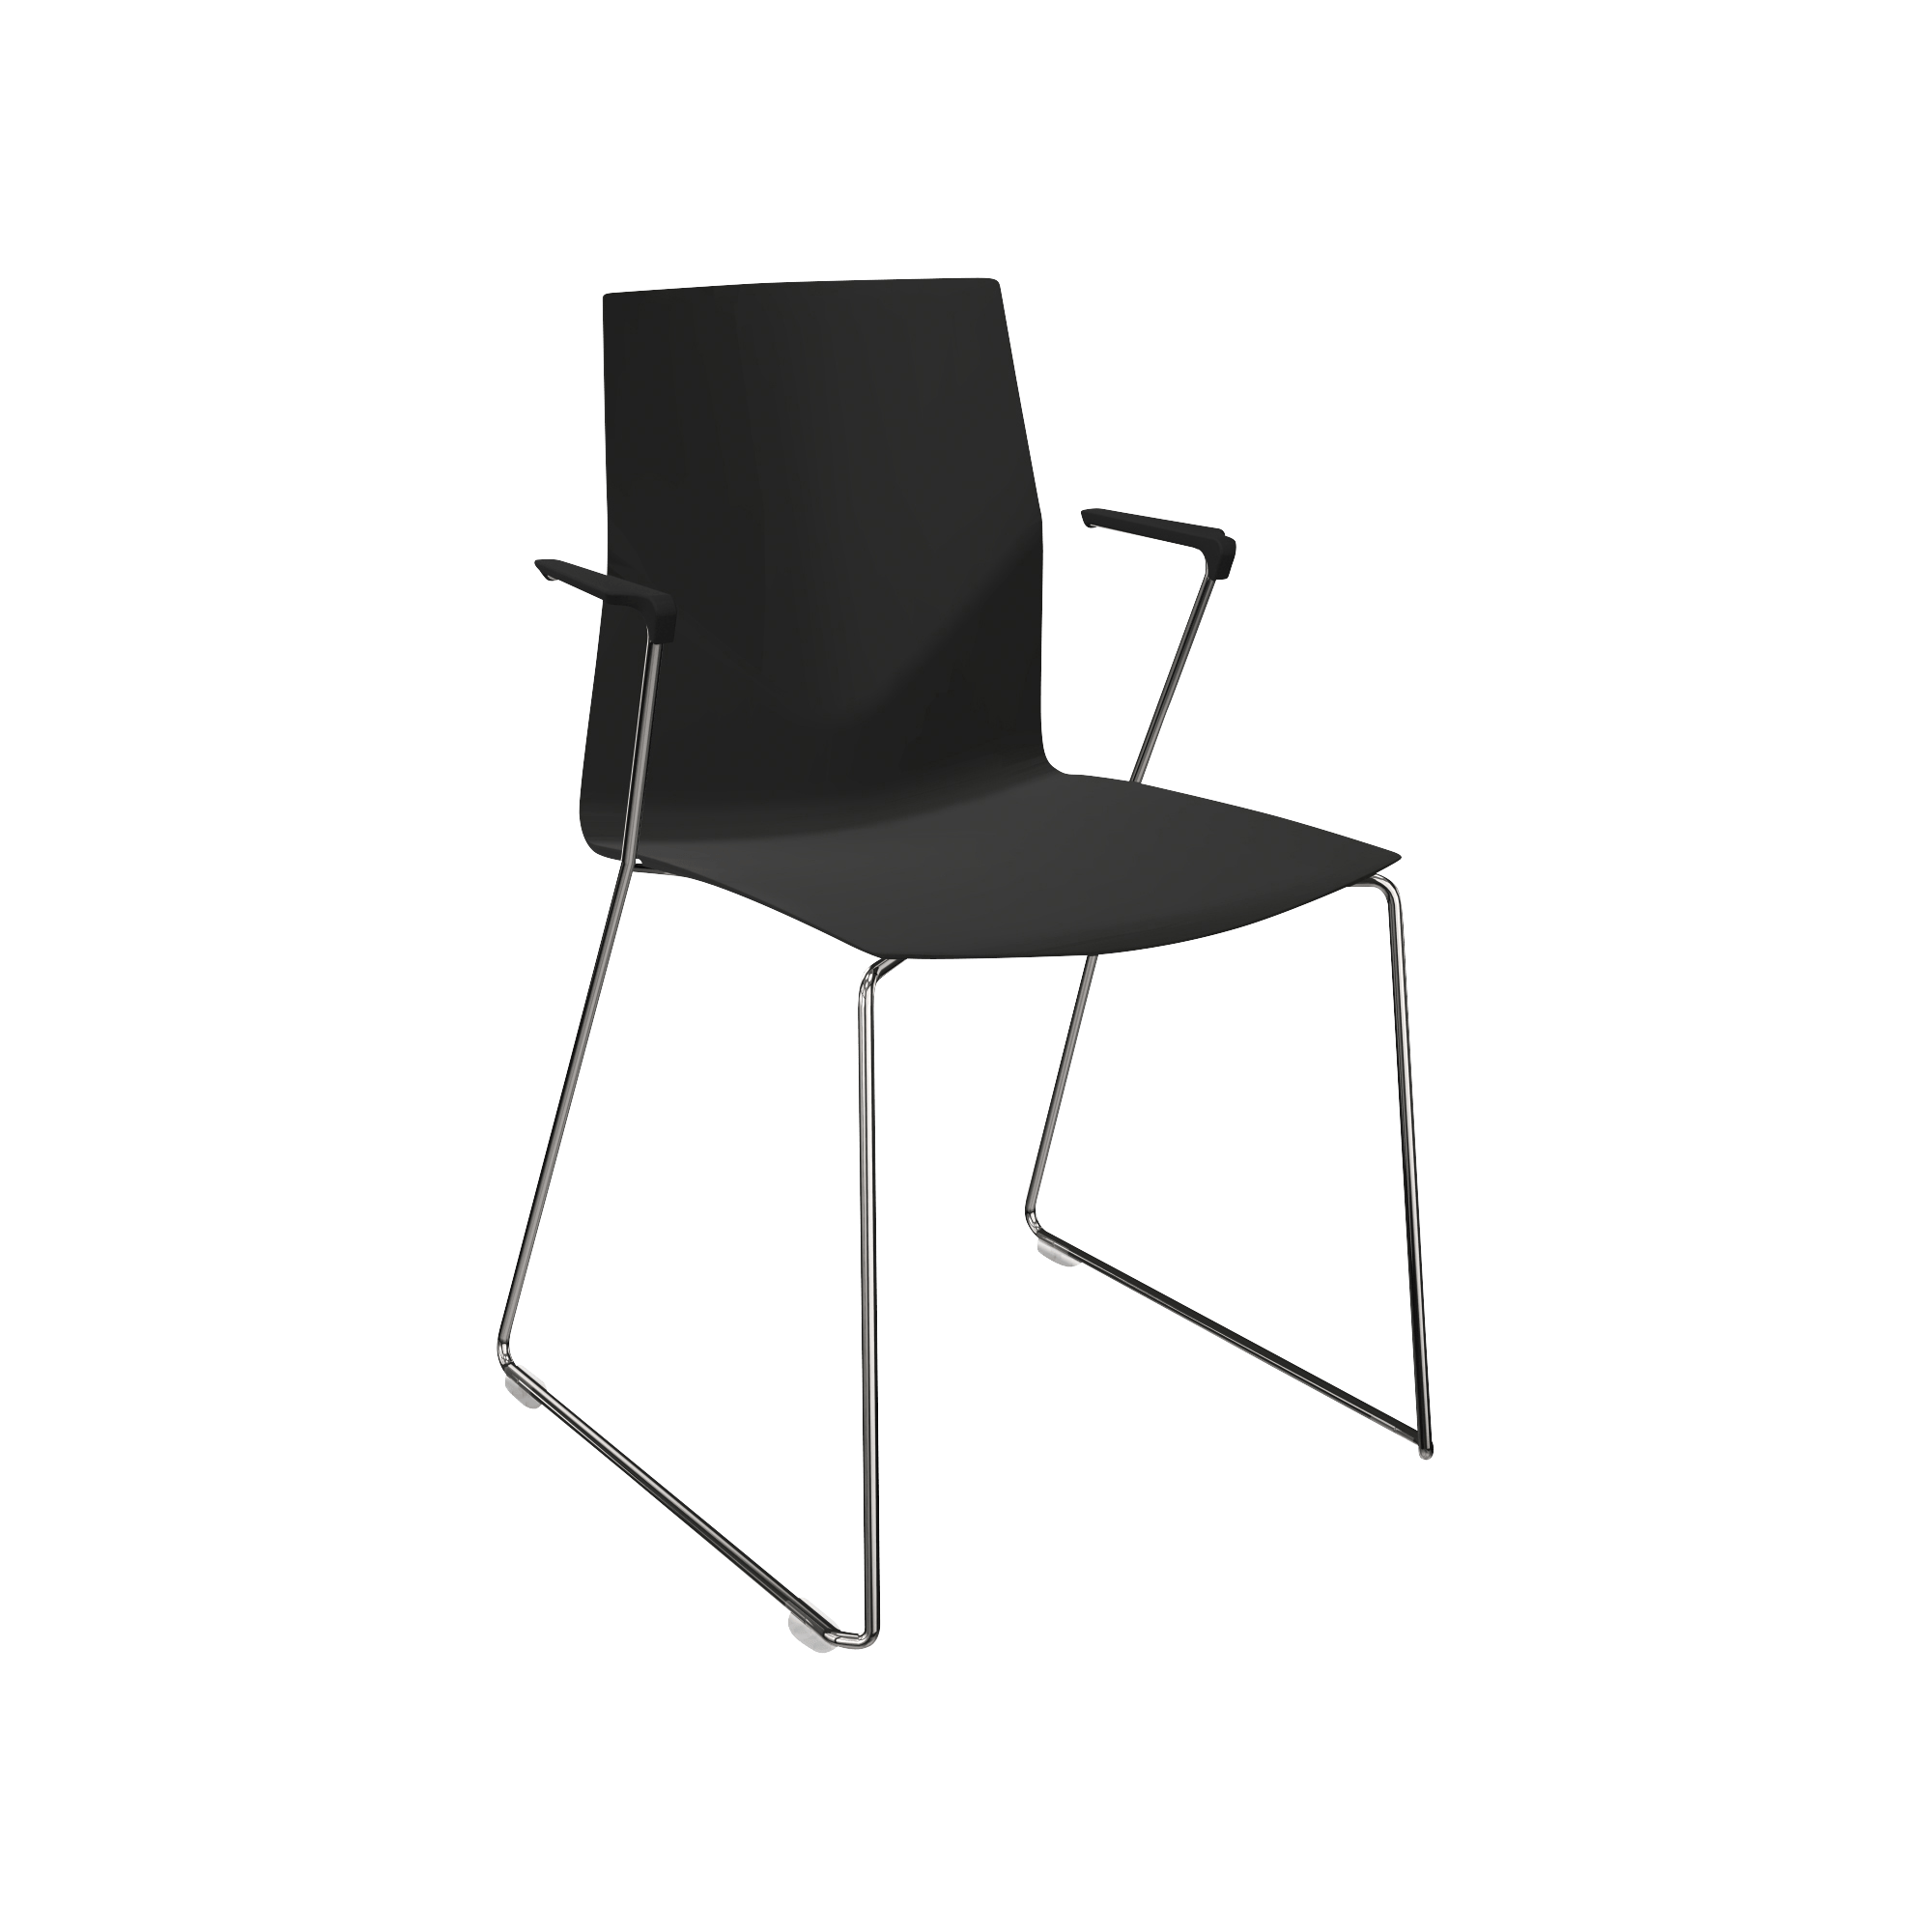 black chair with metal legs and arm rests